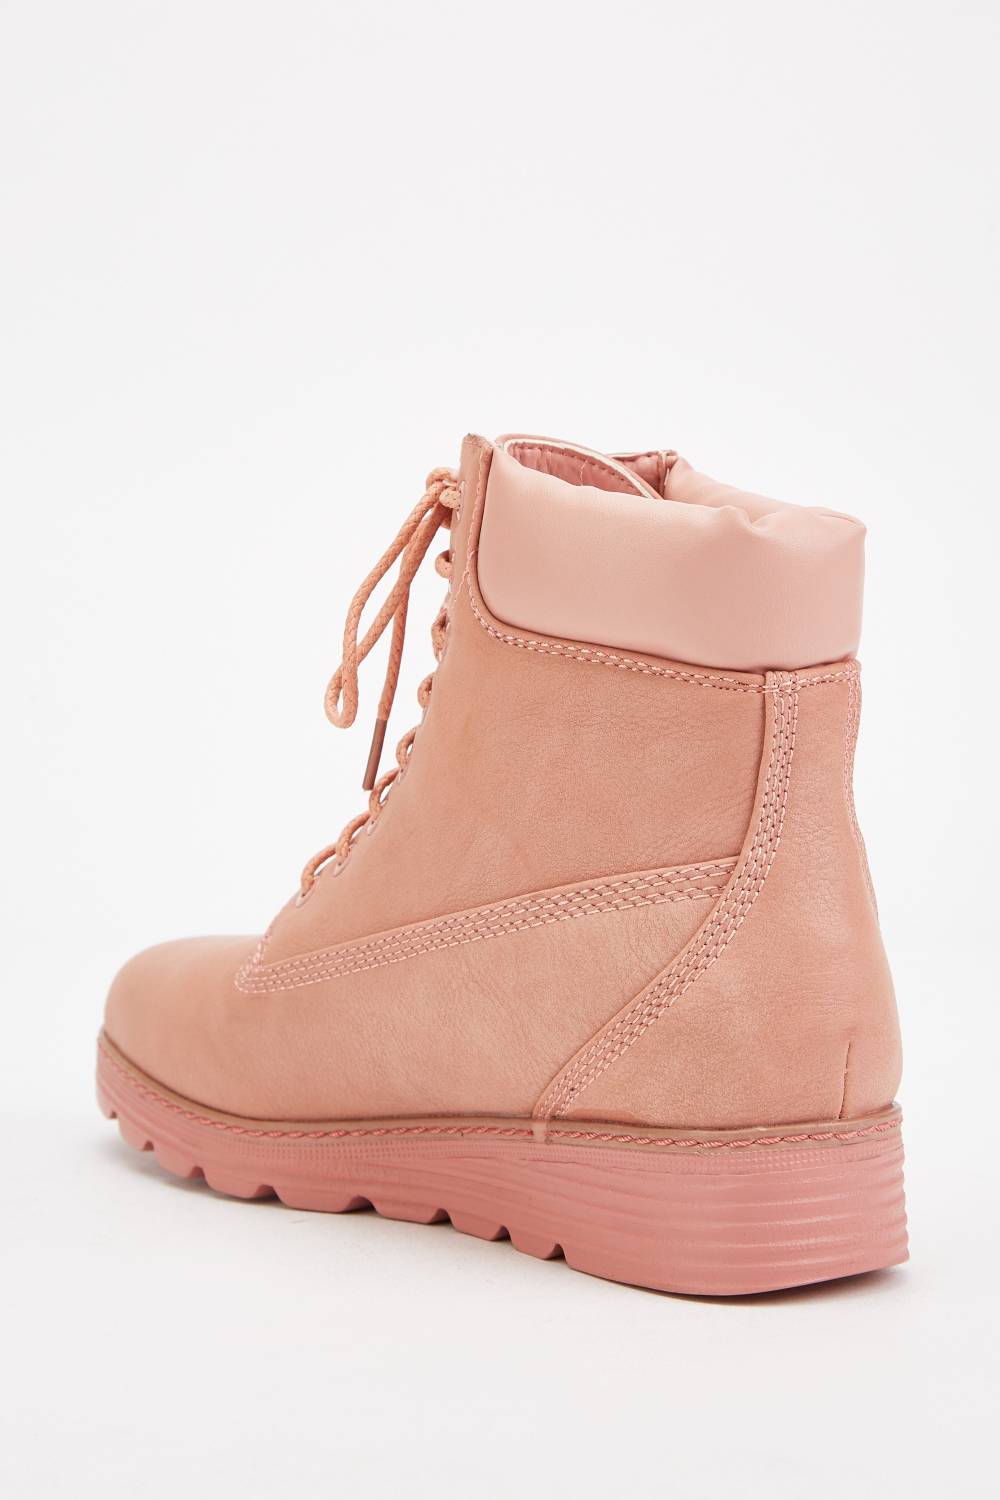 Pink Wedge Lace Up Boots - Just $7